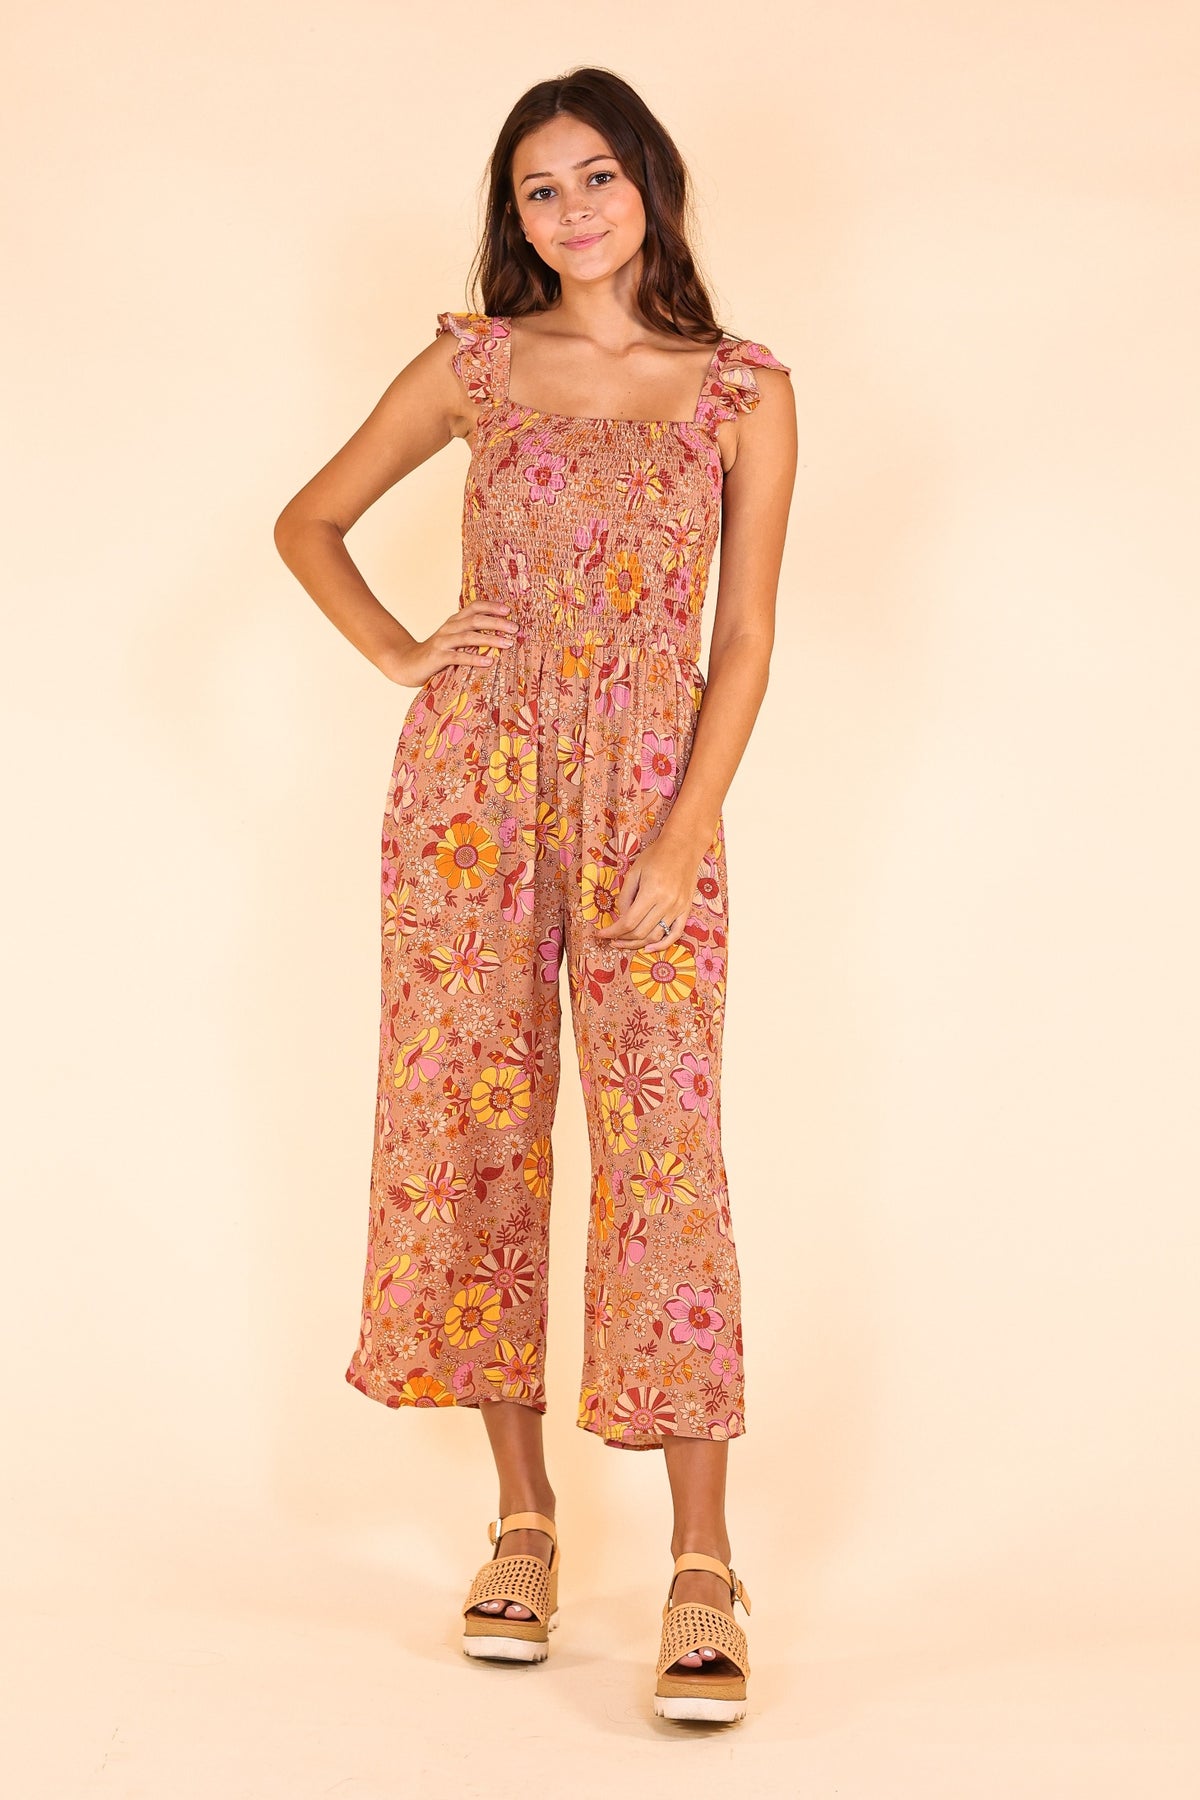 The Go Your Own Way Jumpsuit